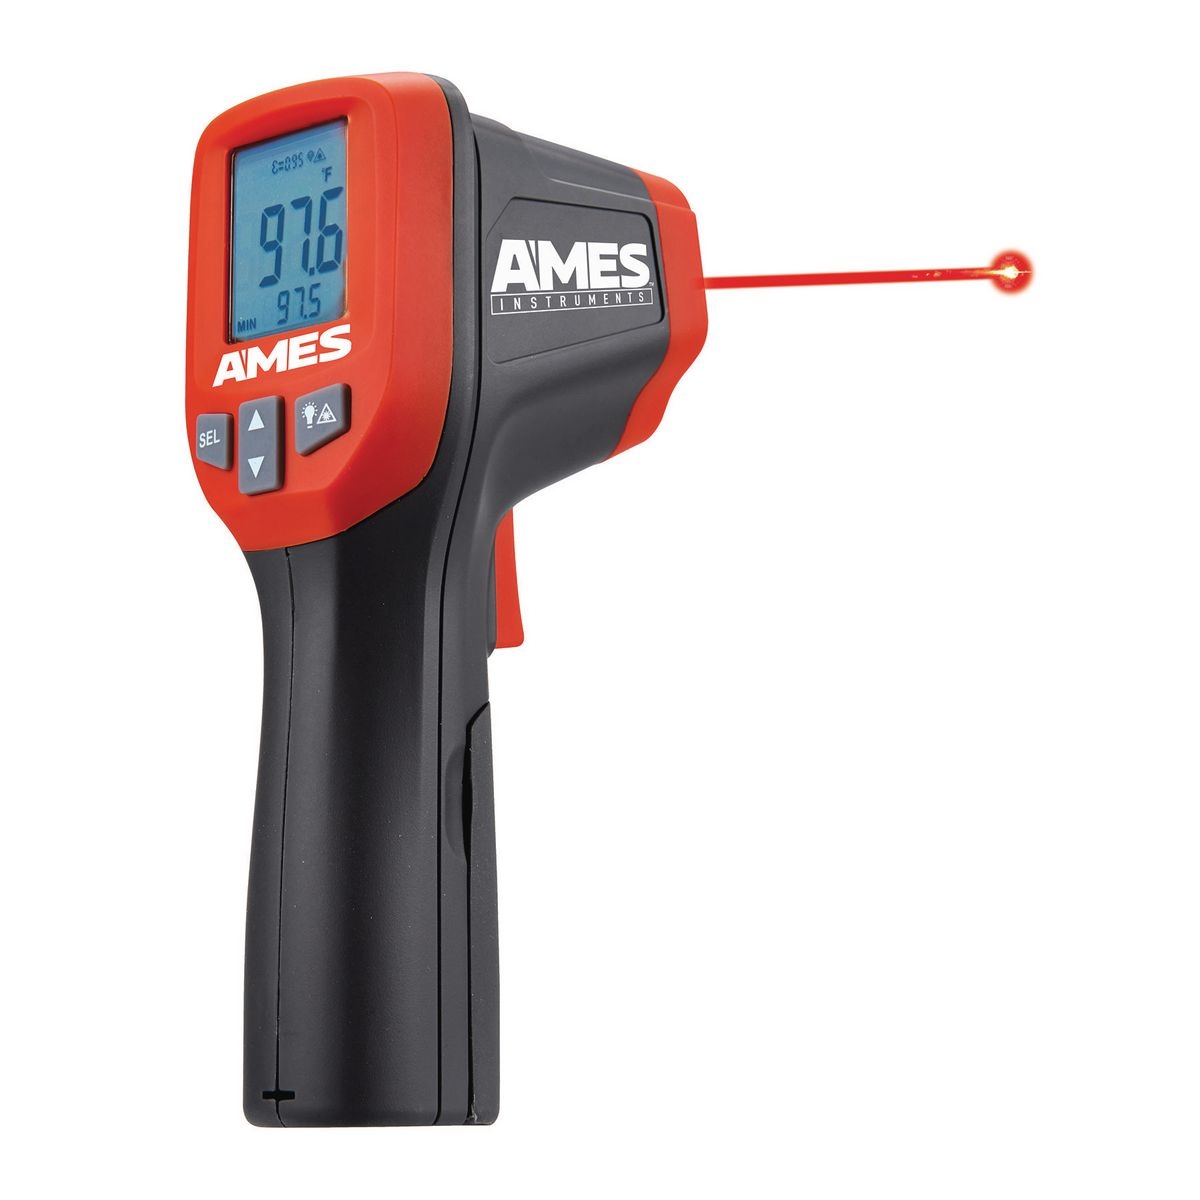 Pinnacolo Infrared Laser Thermometer